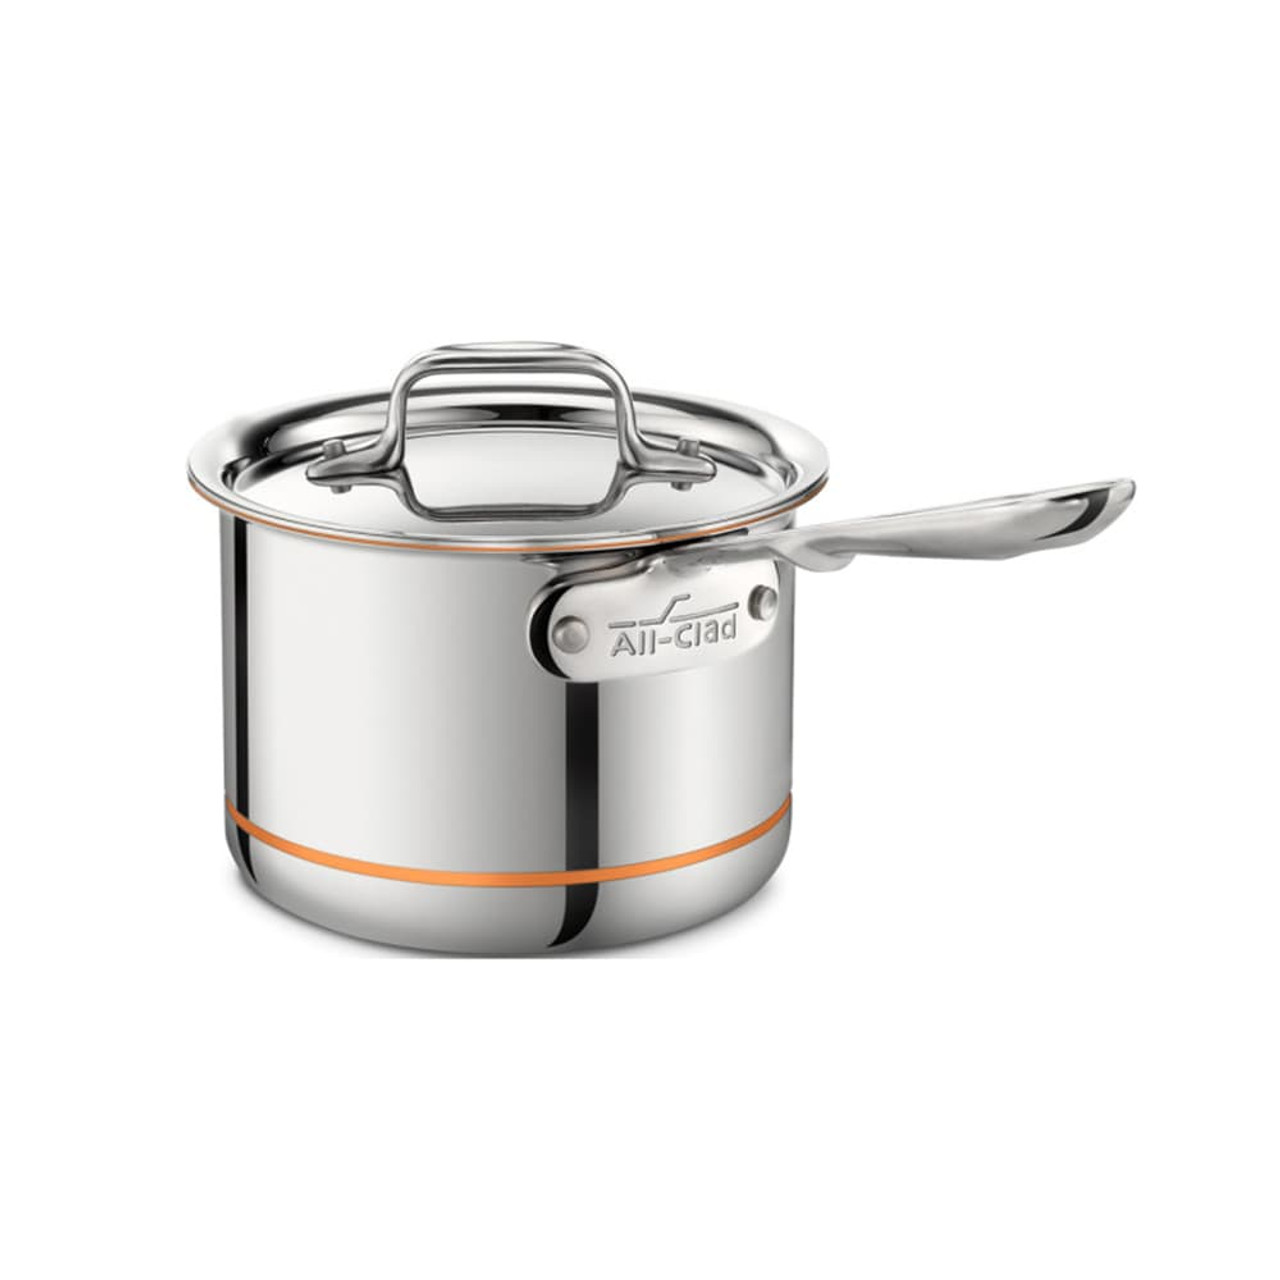 https://cdn11.bigcommerce.com/s-hccytny0od/images/stencil/1280x1280/products/507/1914/all-clad-copper-core-sauce-pan-2qt__68189.1511048194.jpg?c=2?imbypass=on